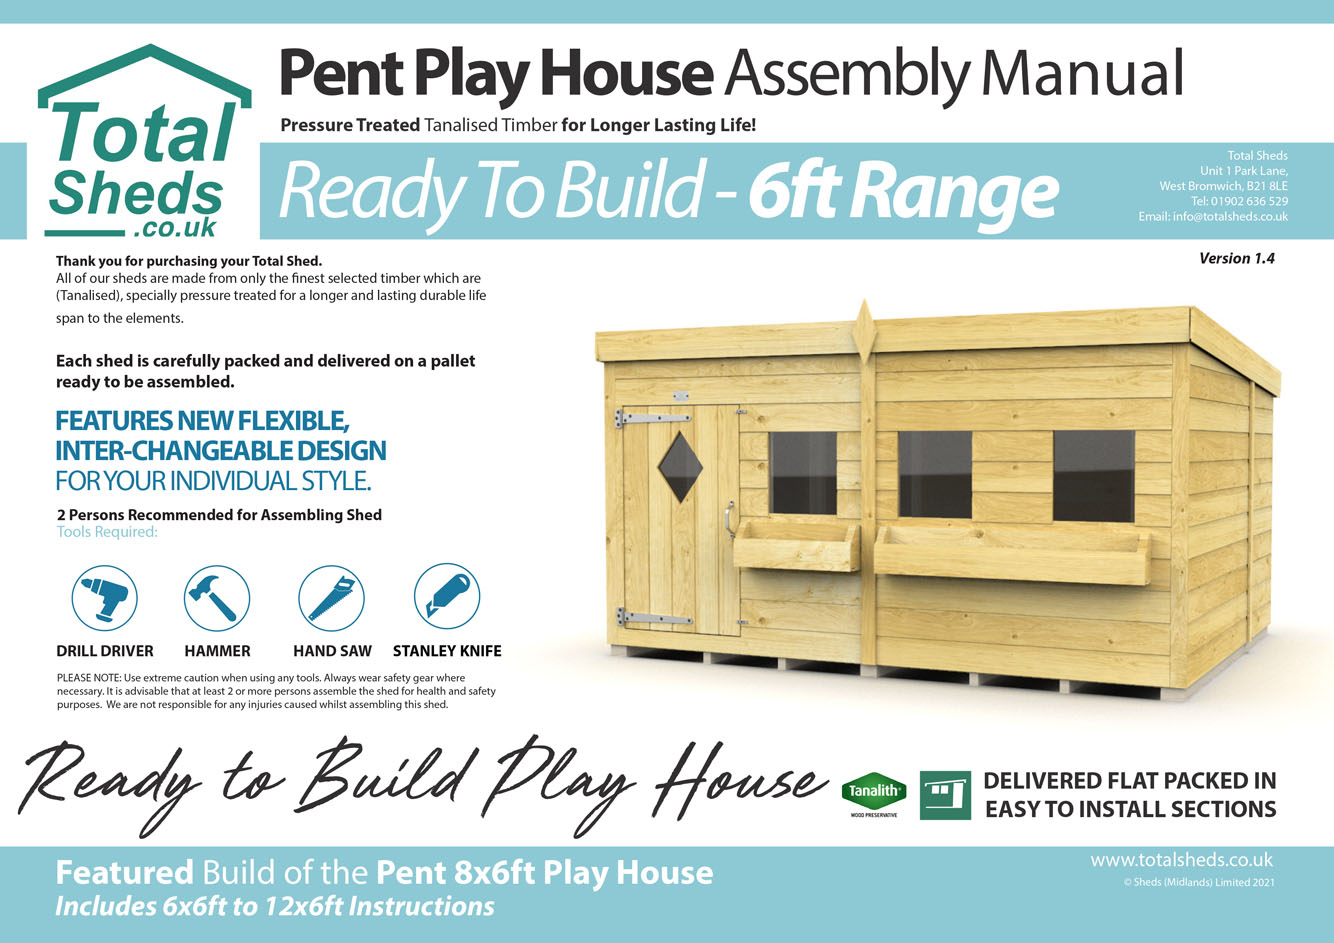 6ft F&F Play House assembly guide